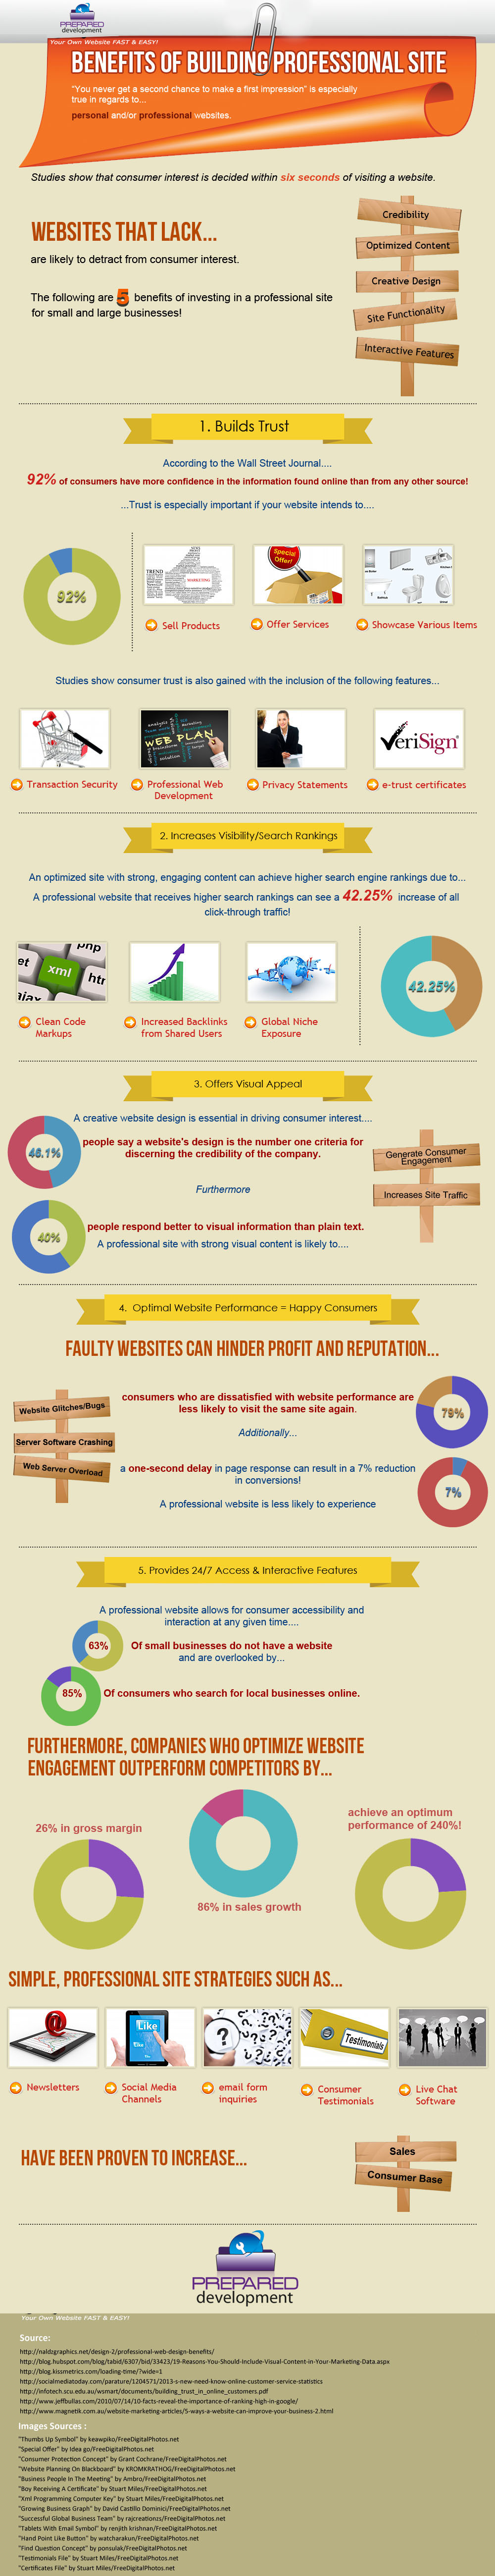 Interesting Infographic About Benefits Of Building Professional Site